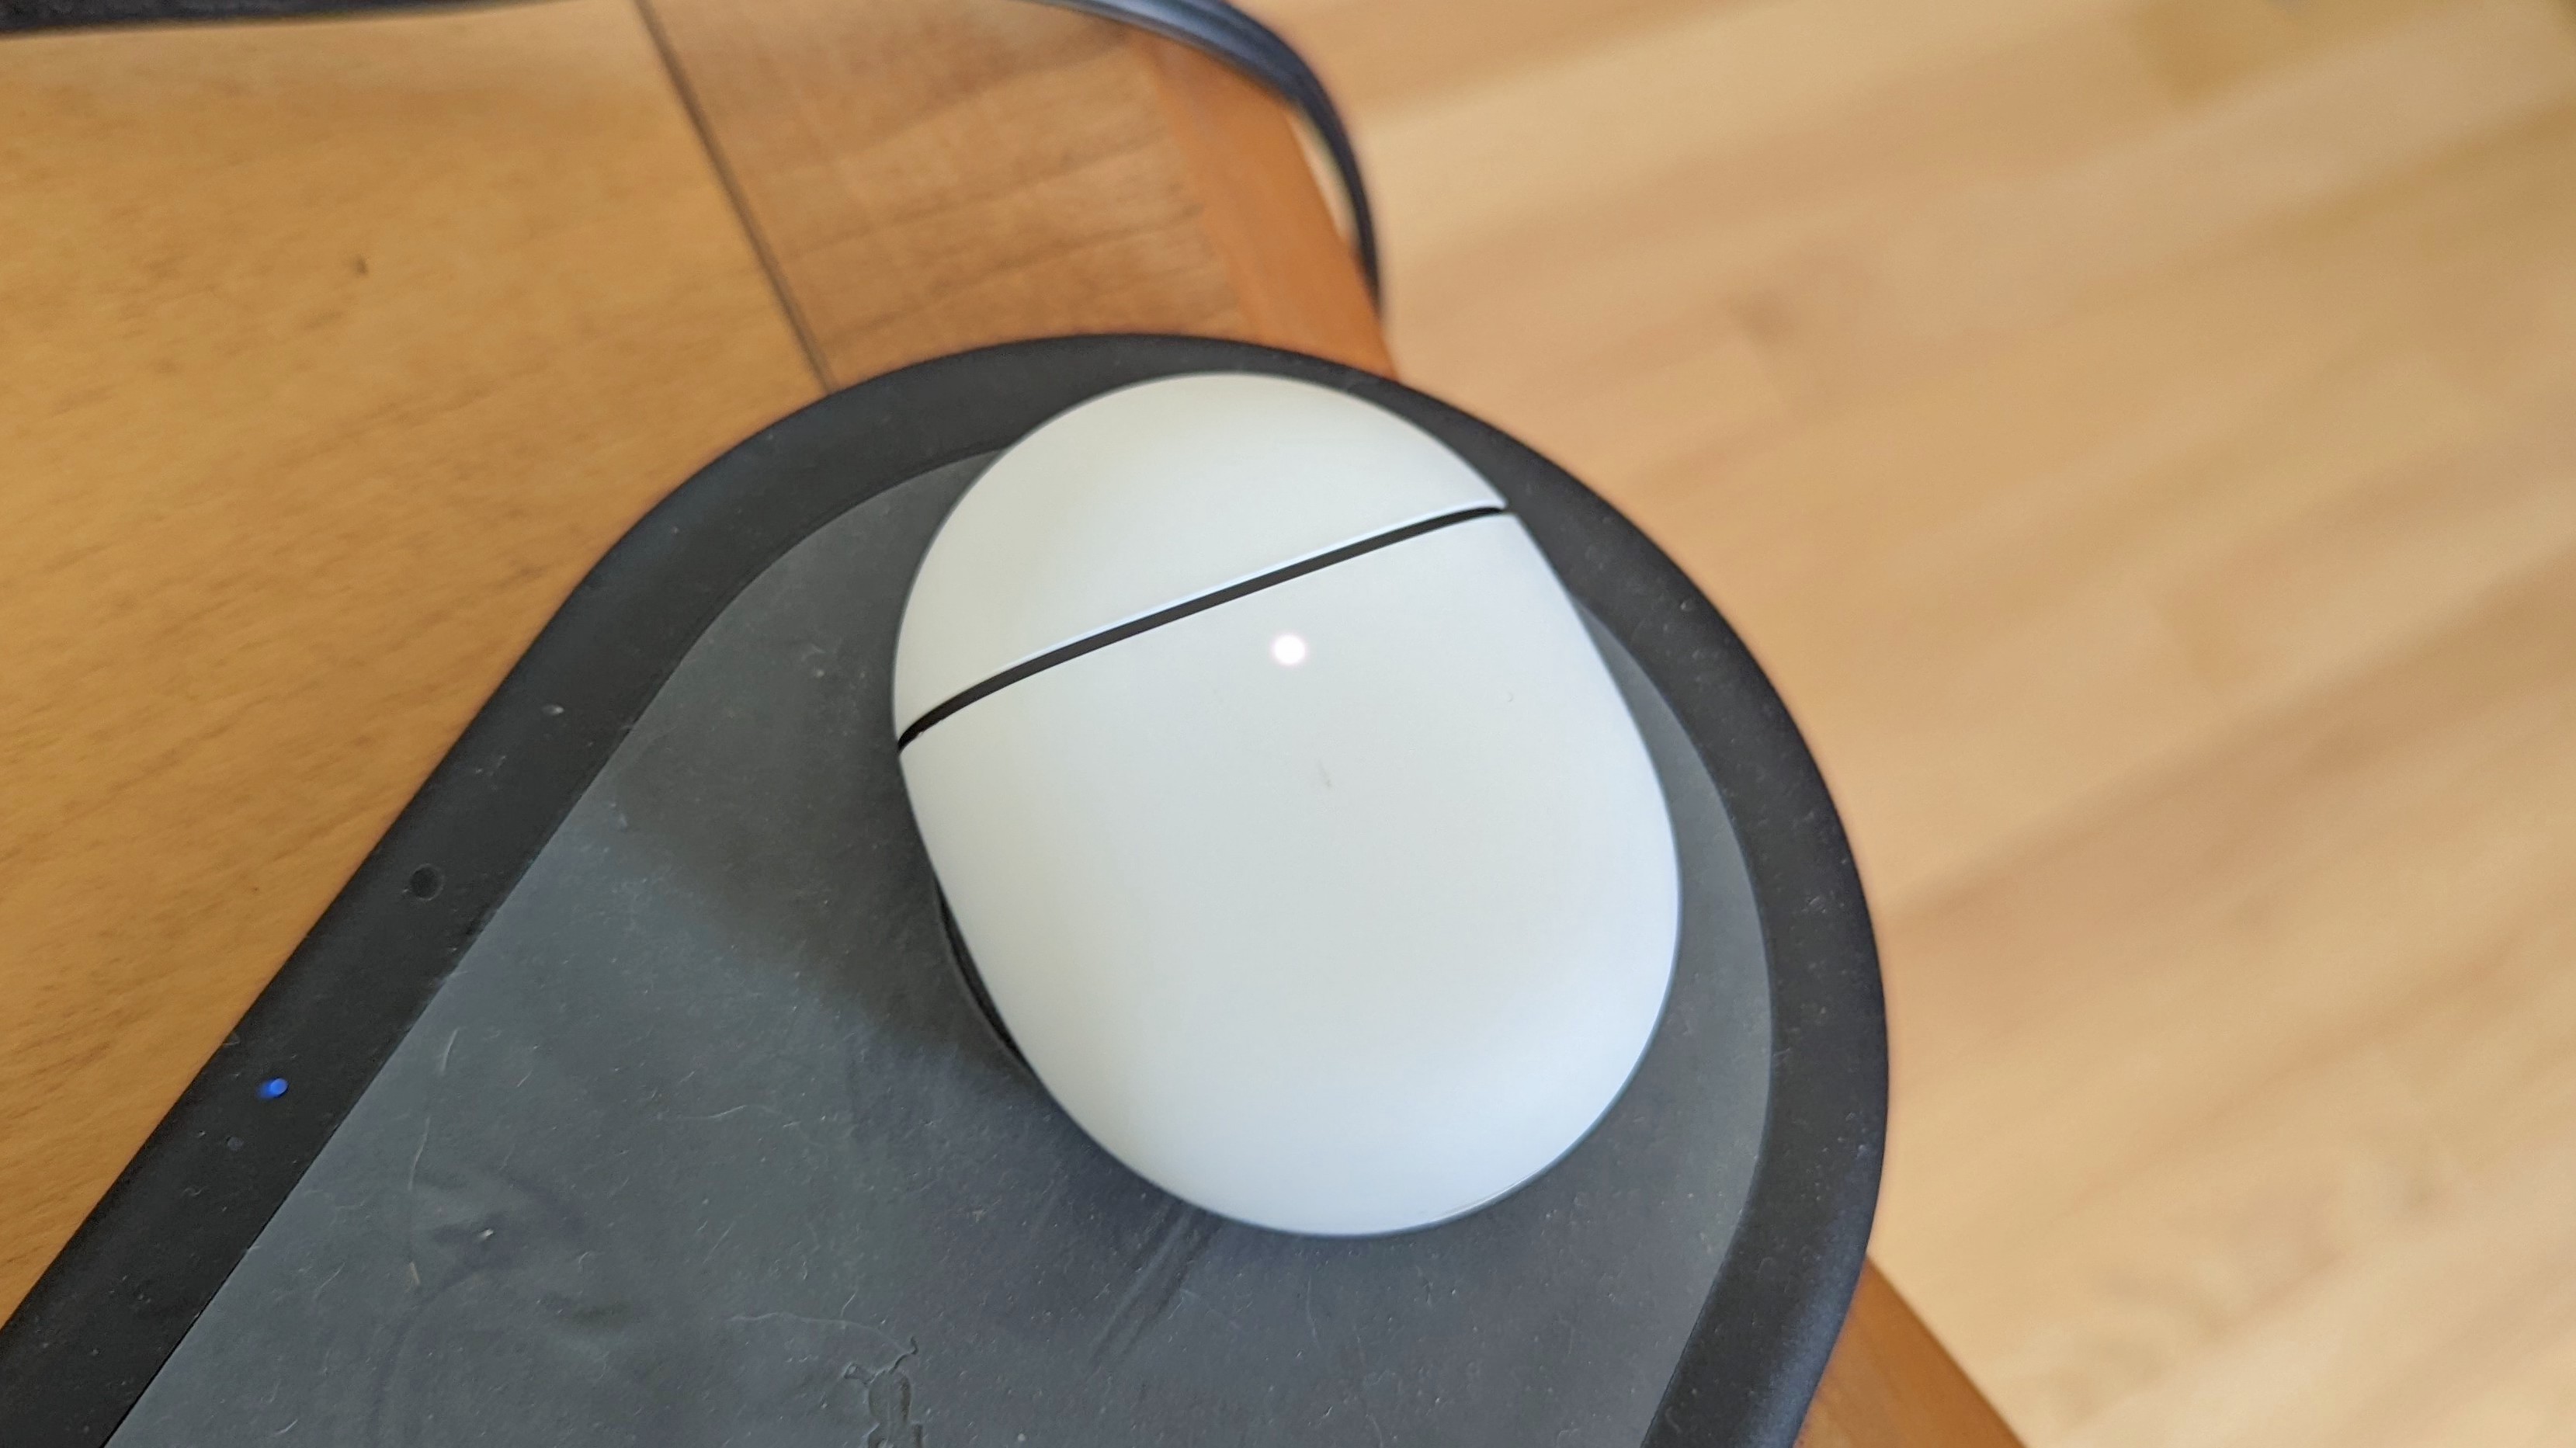 The Google Pixel Buds Pro charging case on a wireless charging pad